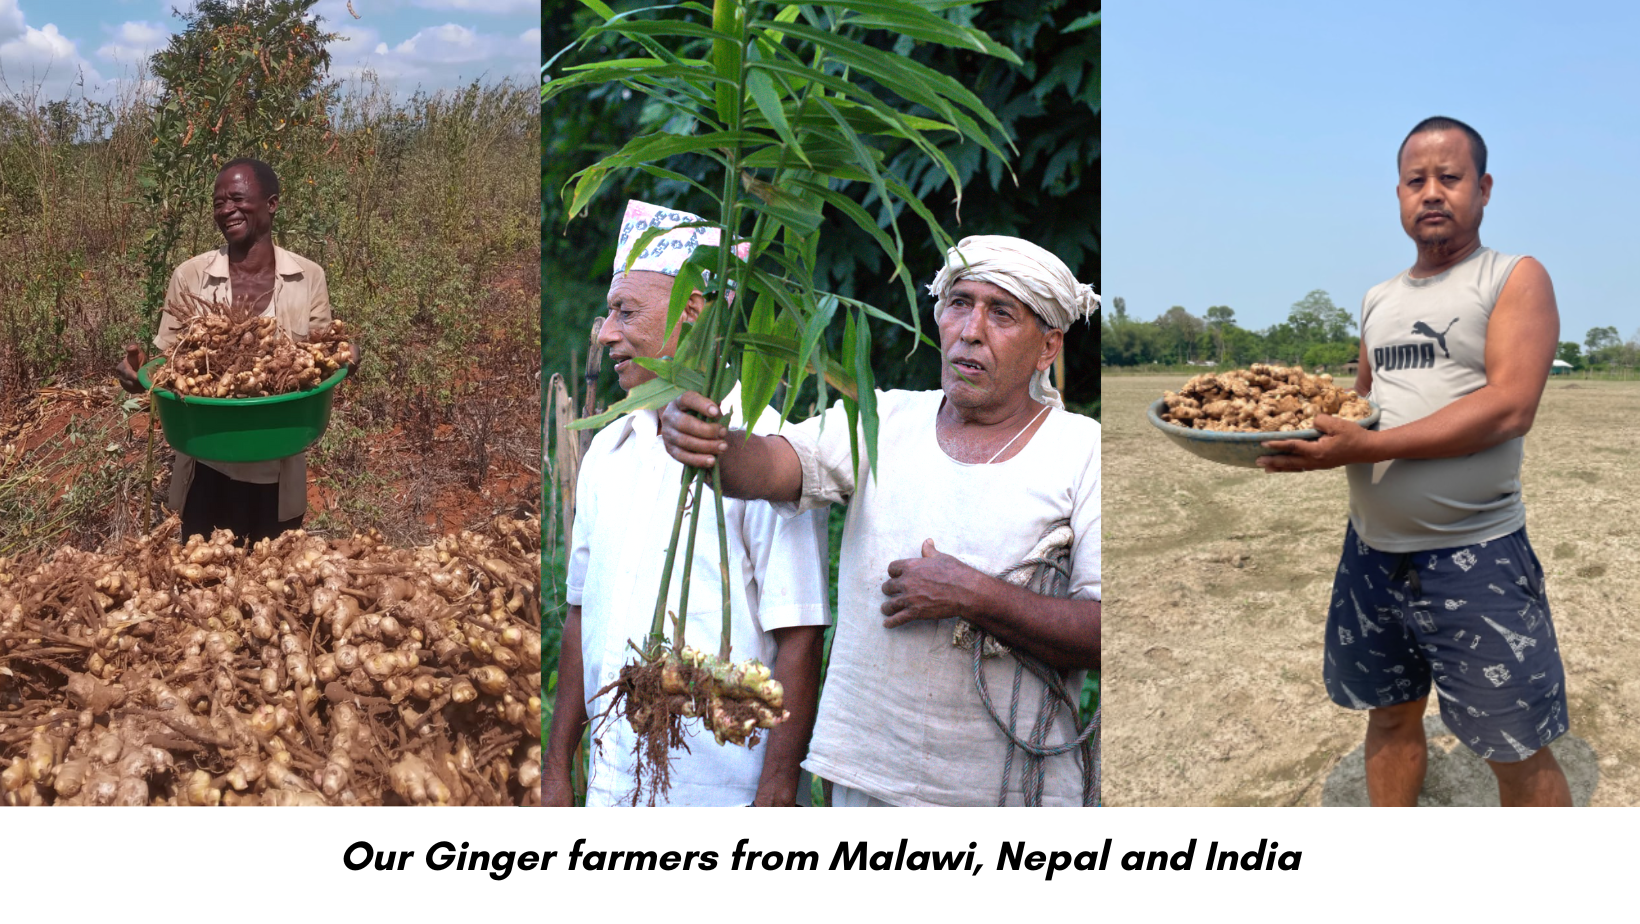 Our ginger farmers